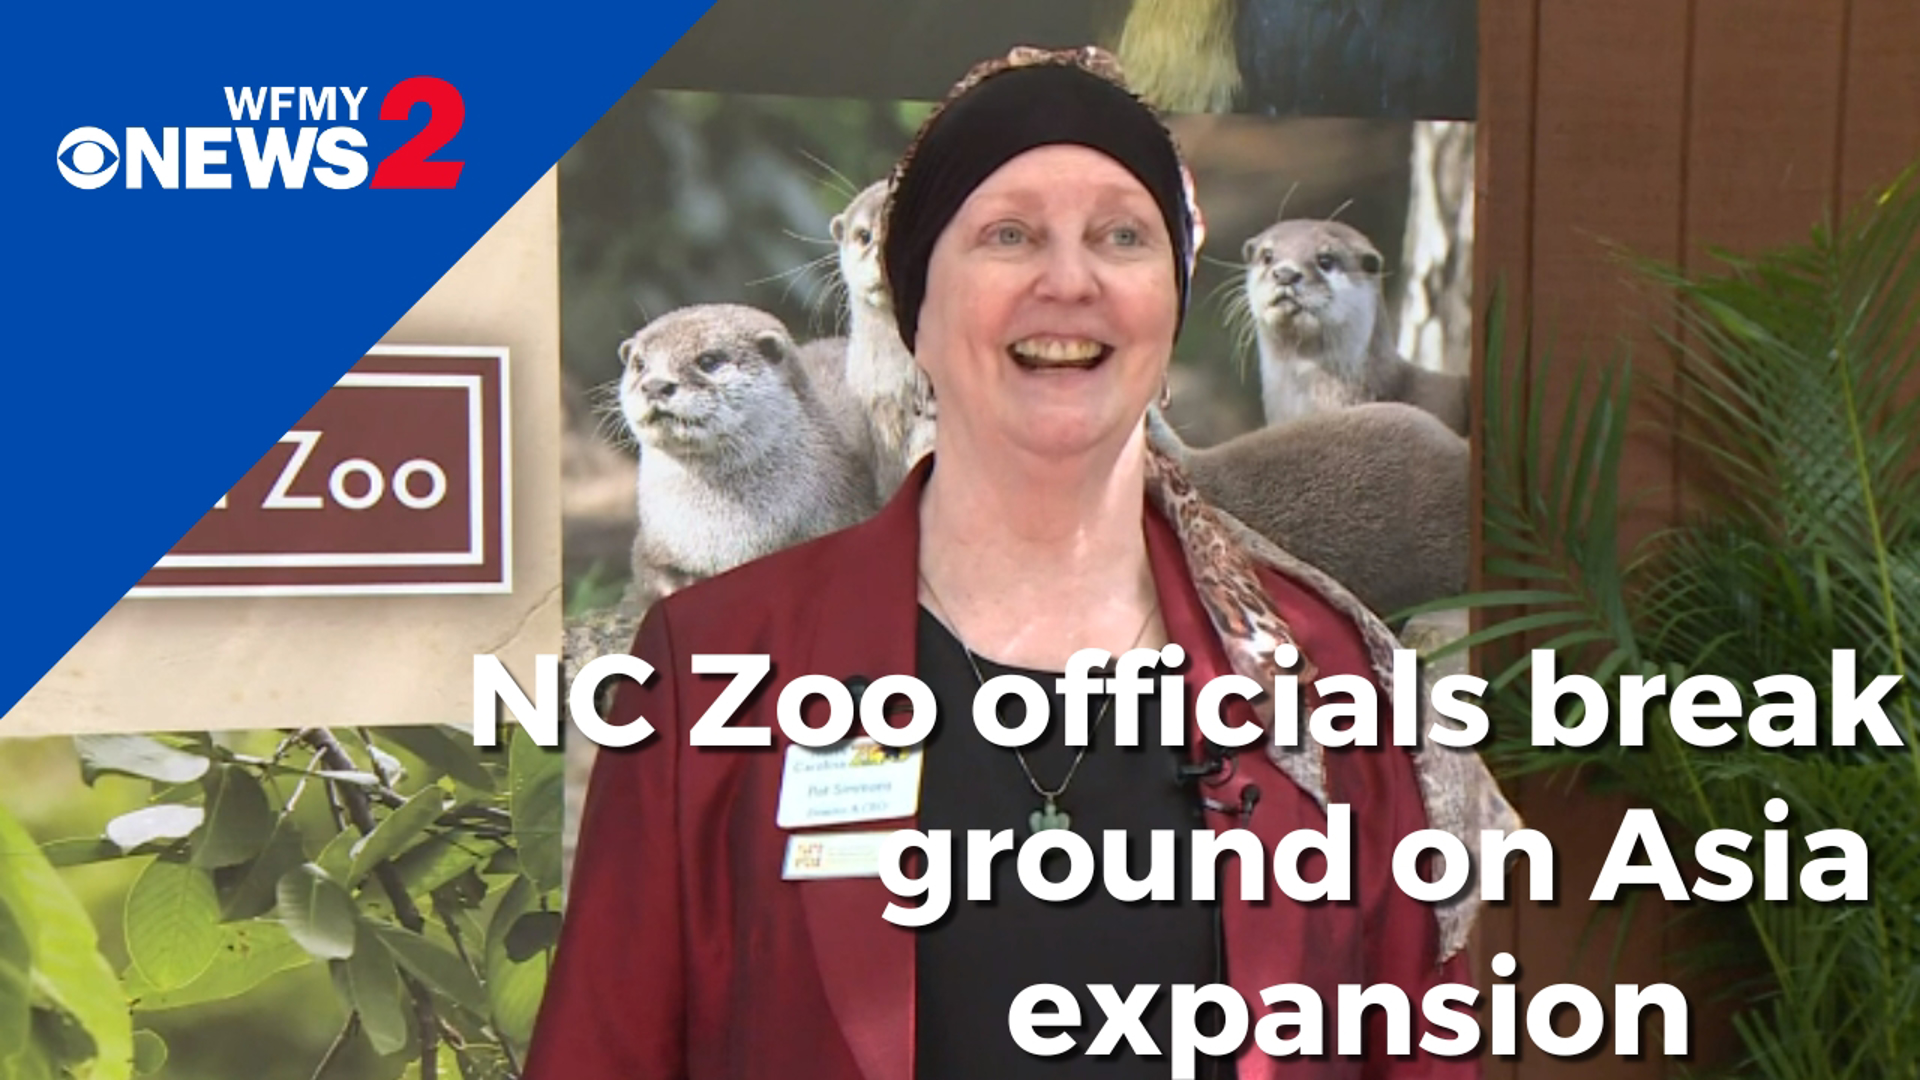 The new 10 acres of exhibits will feature tigers and Komodo dragons. It’s expected to open in 2026.